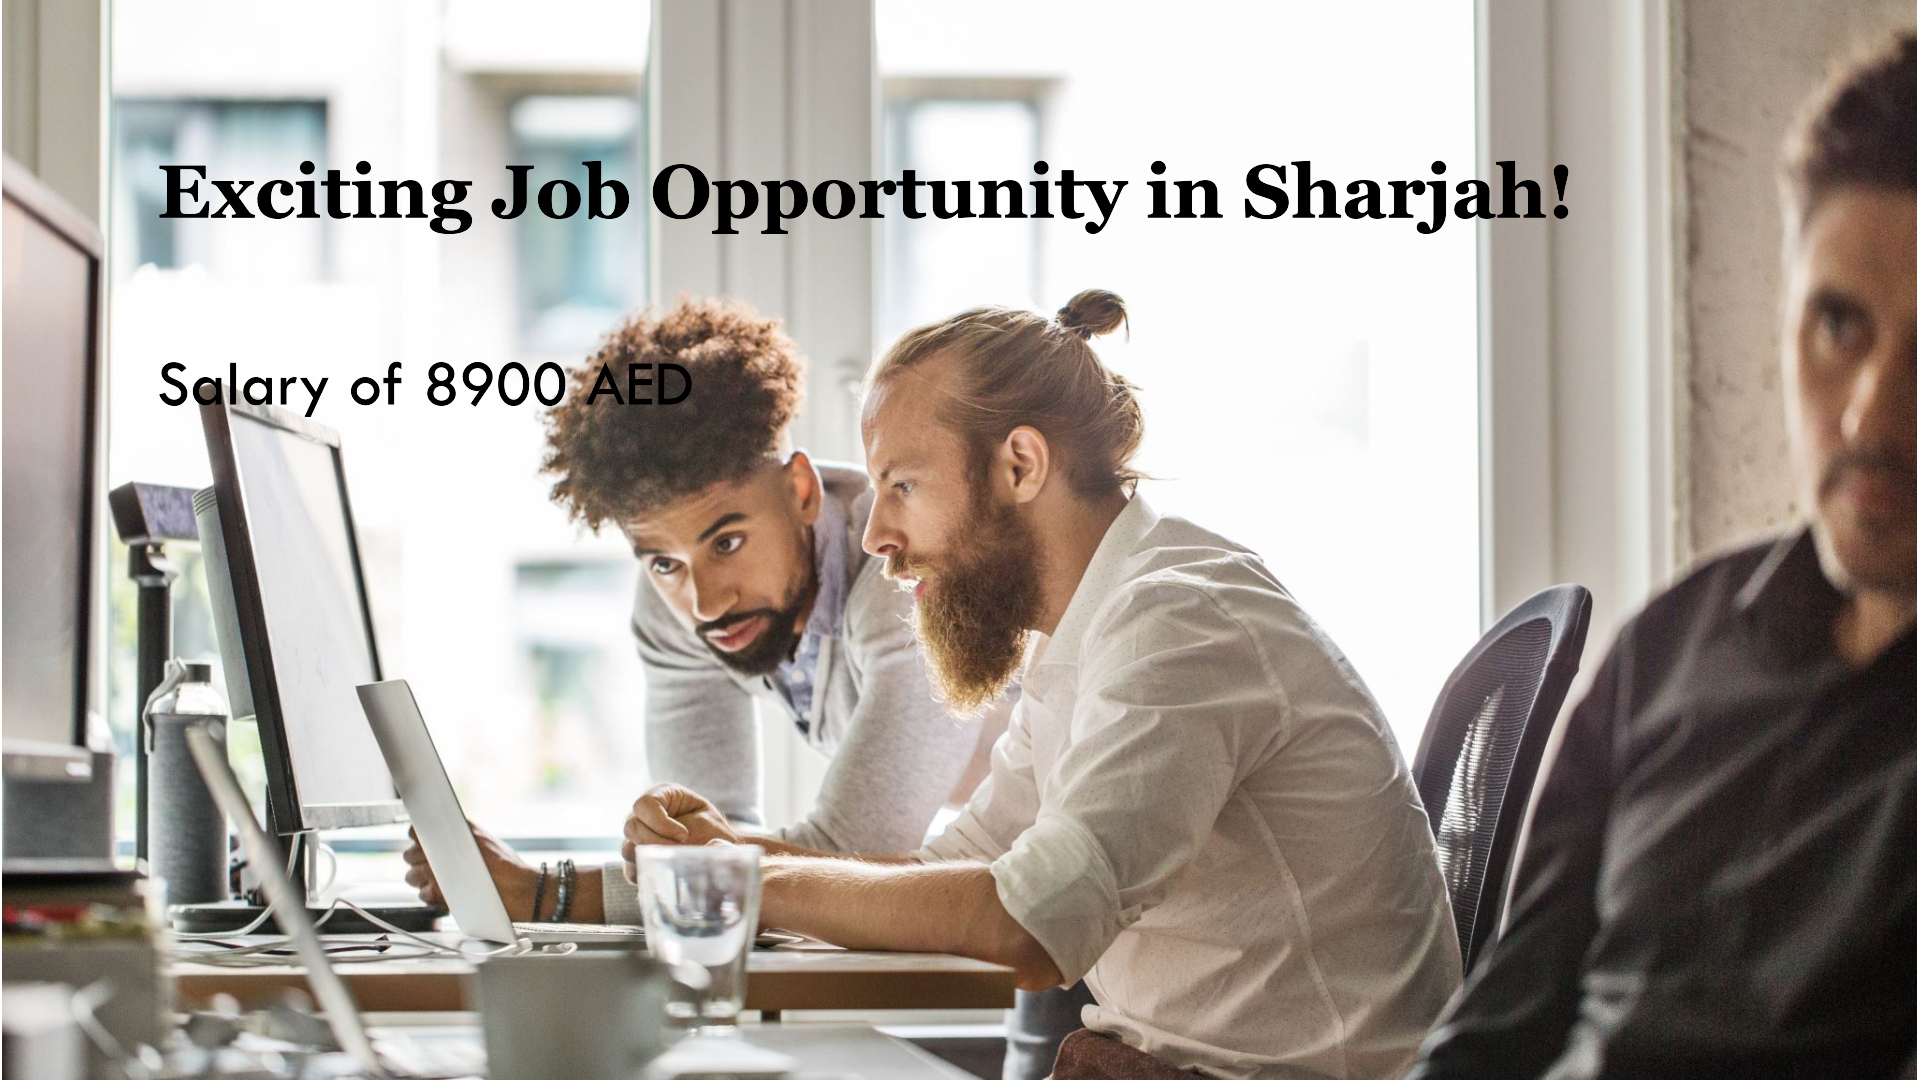 Sharjah job vacancy today with salary 8900 AED